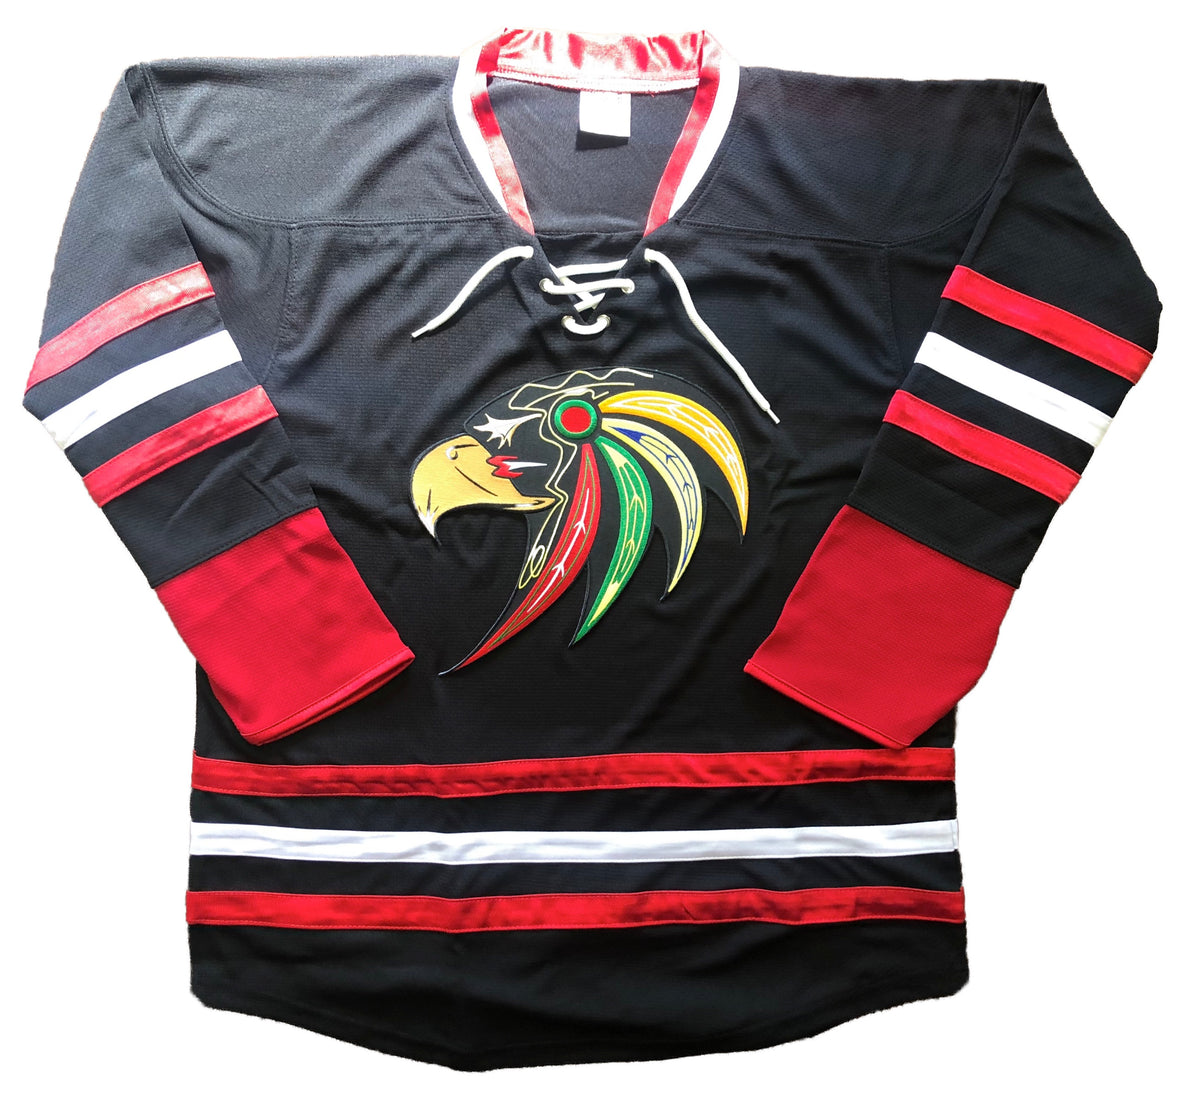 GRISWOLD Jersey with Embroidered Twill Crests and Sleeve Numbers – Tally  Hockey Jerseys